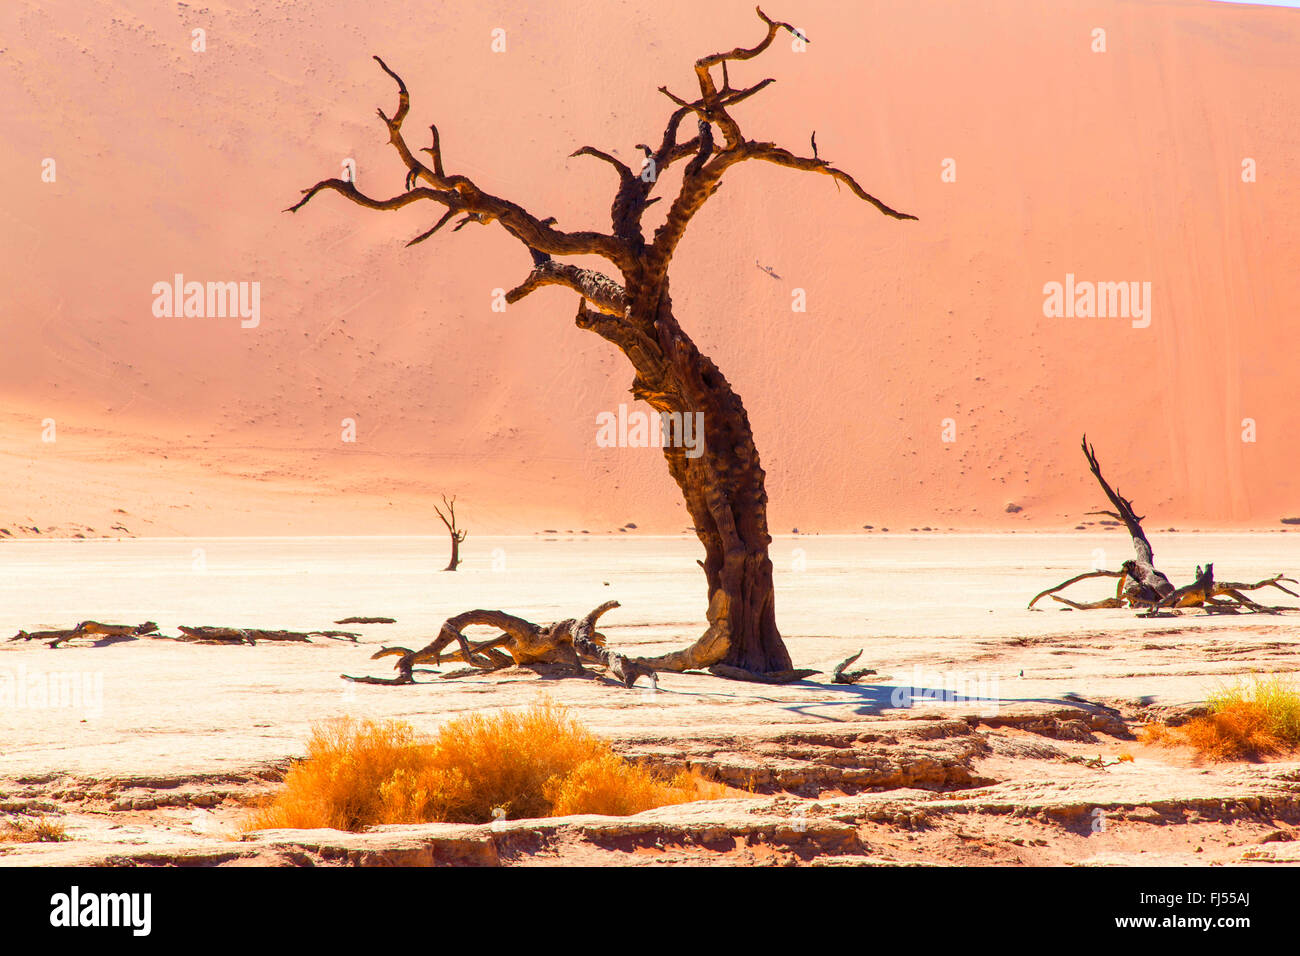 Dead Vlei clay pan and dead camel thorn tree in front of a dune, Namibia, Sesriem Stock Photo